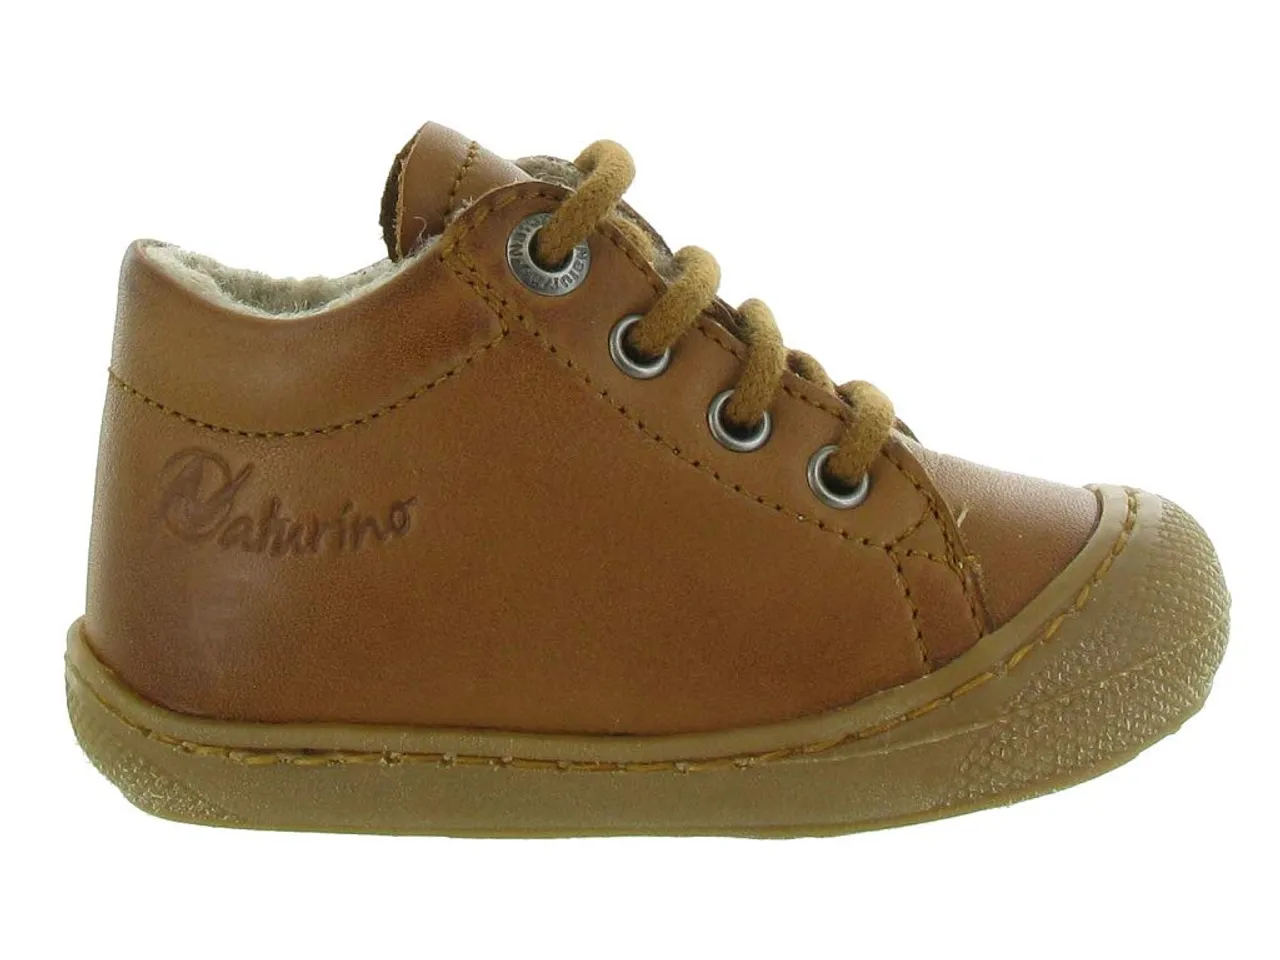 Naturino Cocoon-First-Steps Leather Shoes Beige 22